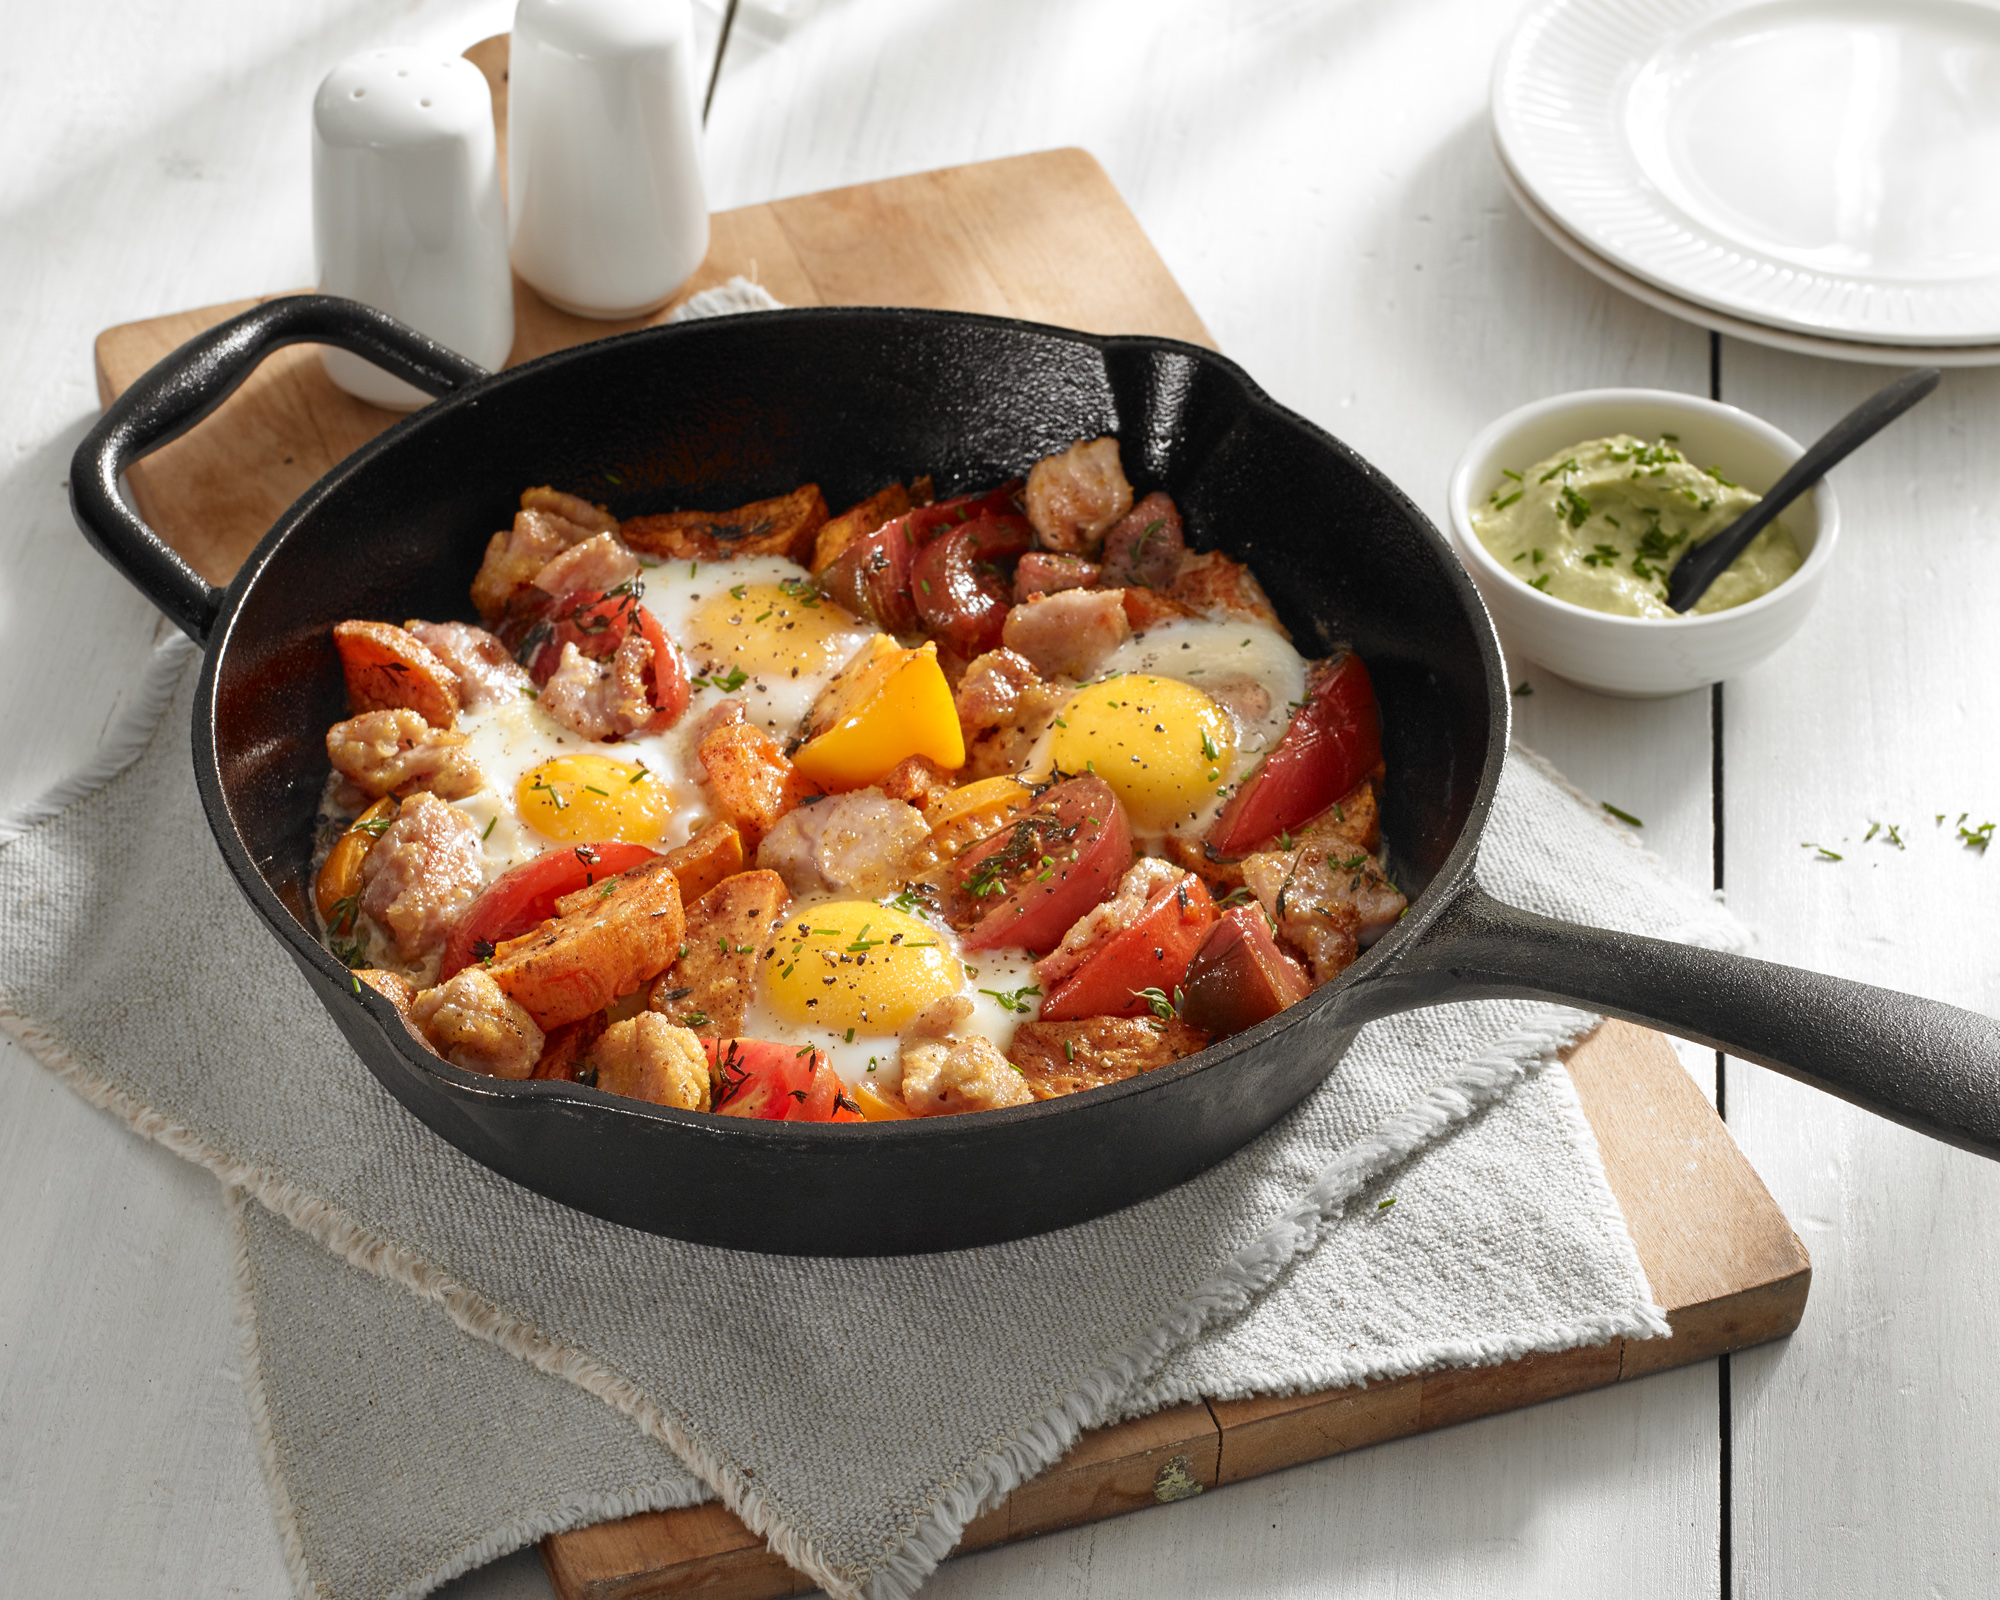 Egg and bacon skillet